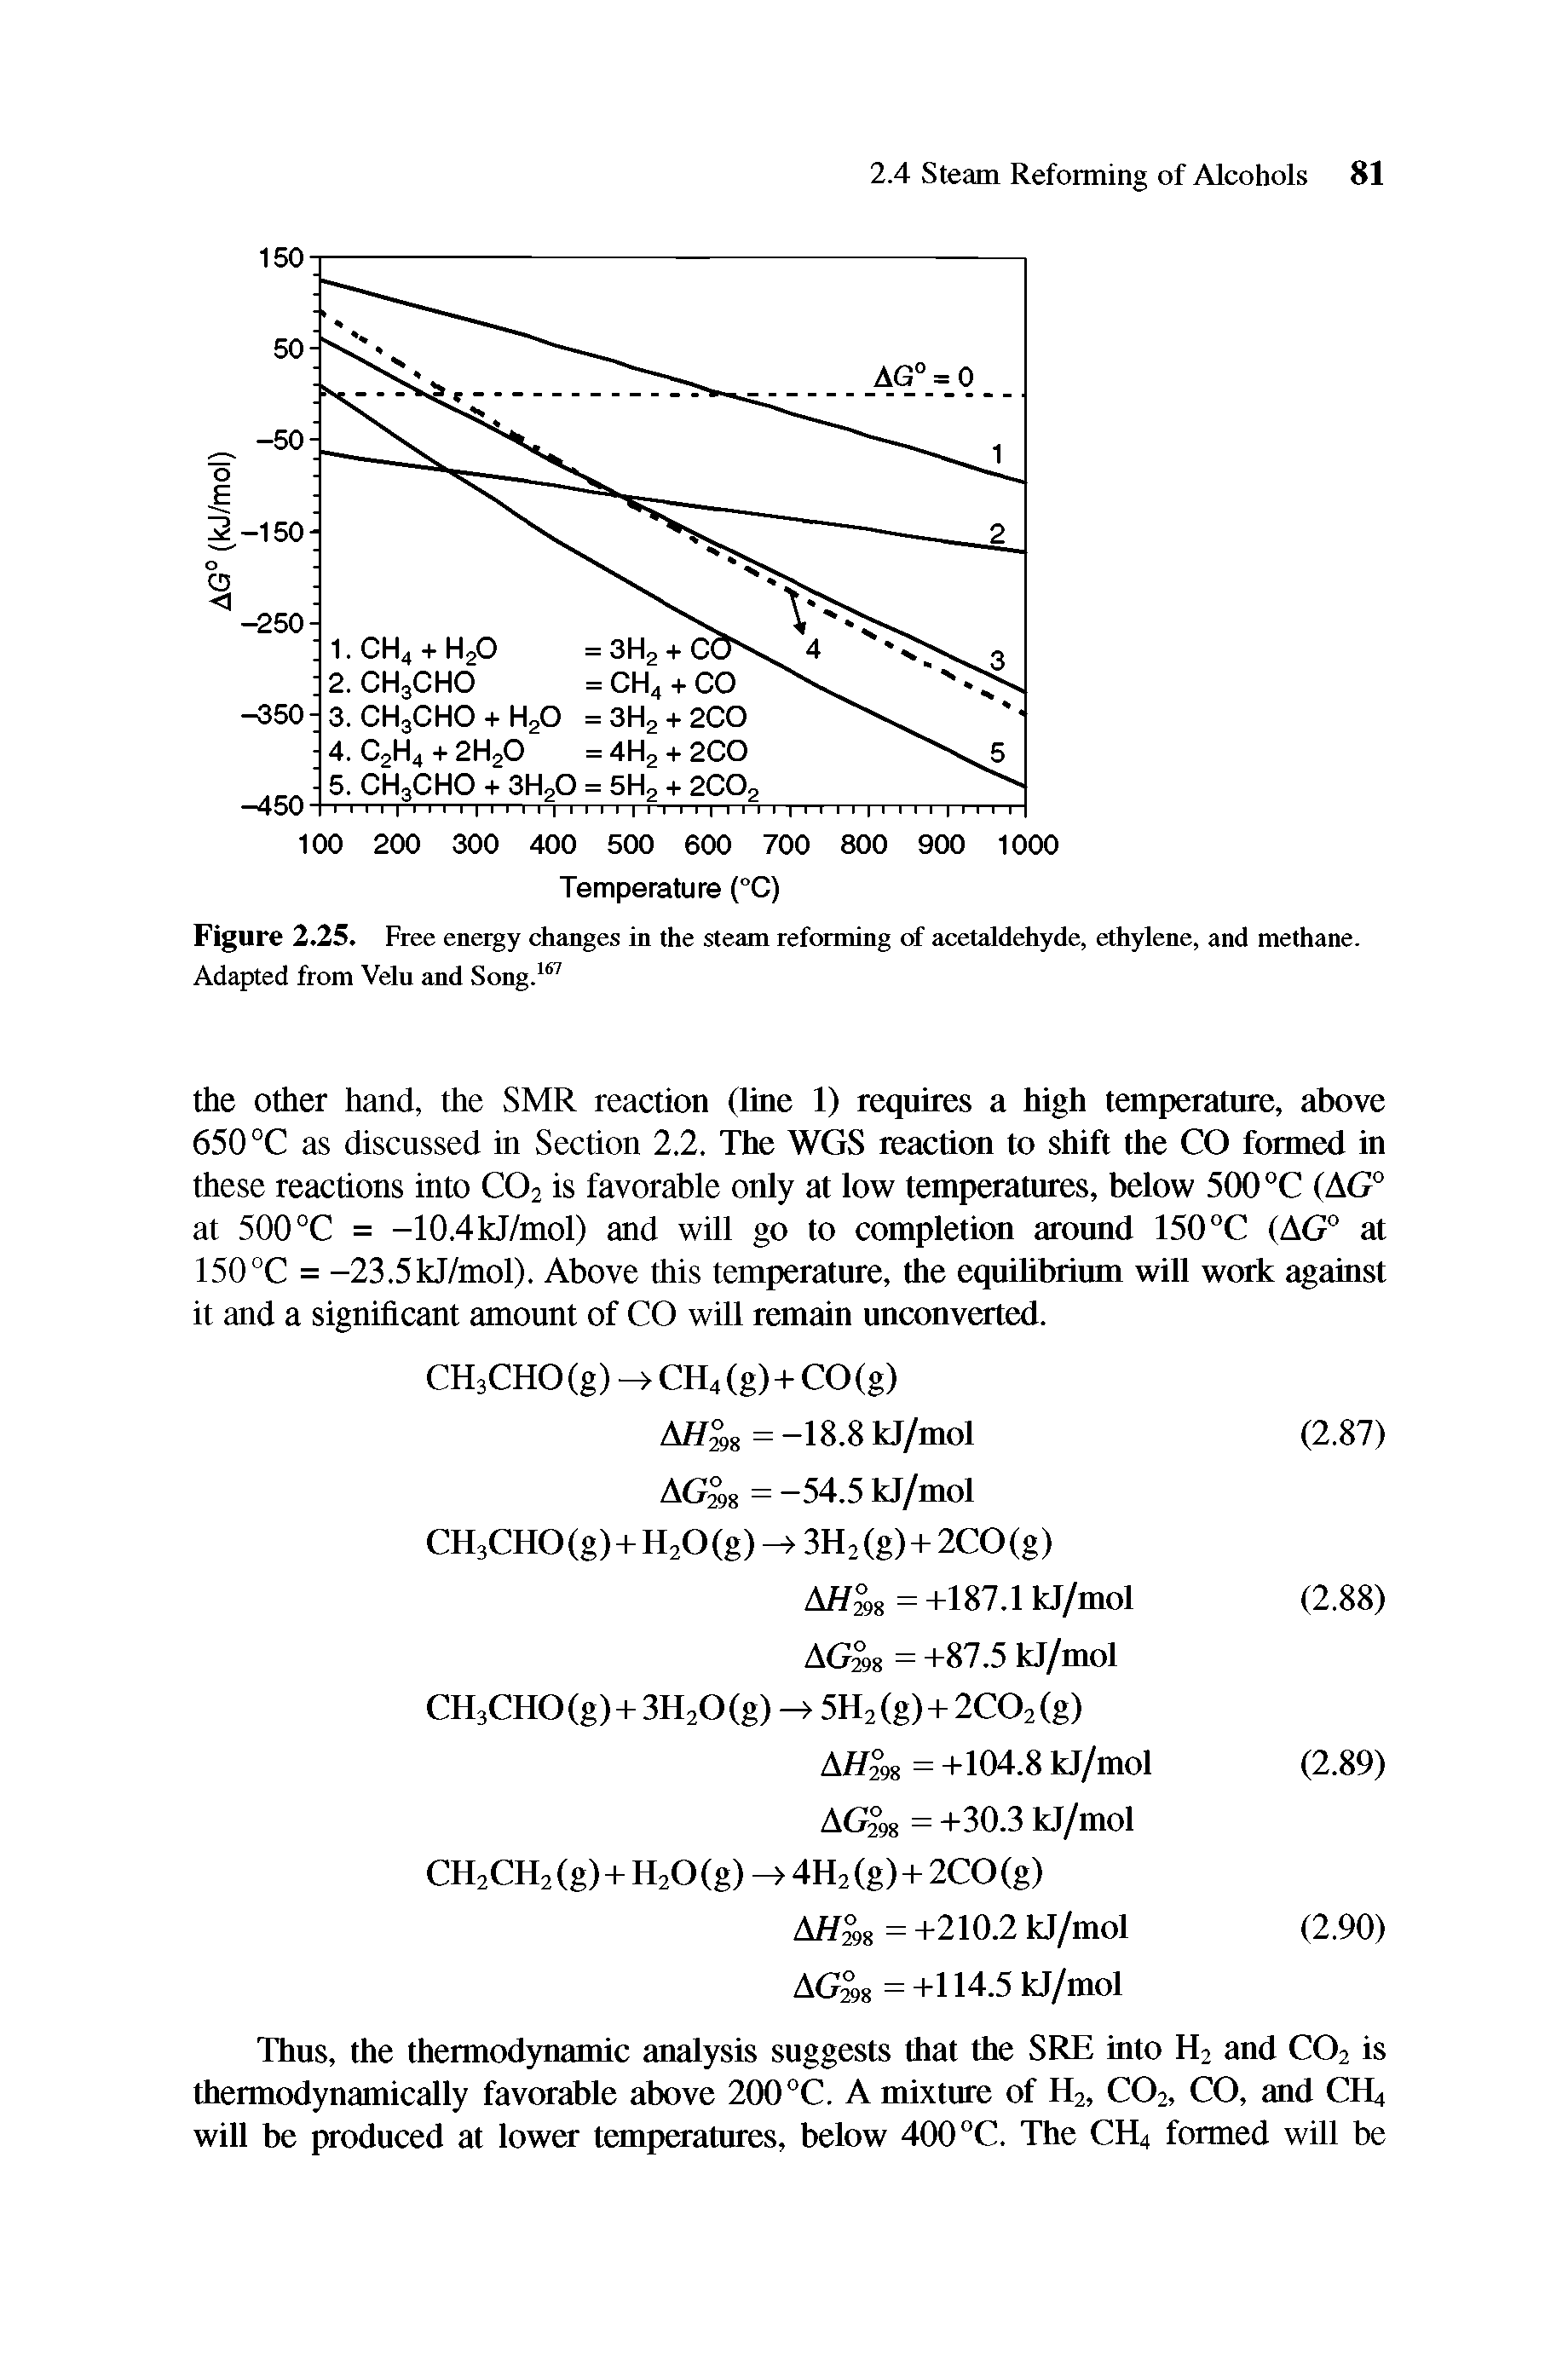 Figure 2.25. Free energy changes in the steam reforming of acetaldehyde, ethylene, and methane. Adapted from Velu and Song.167...